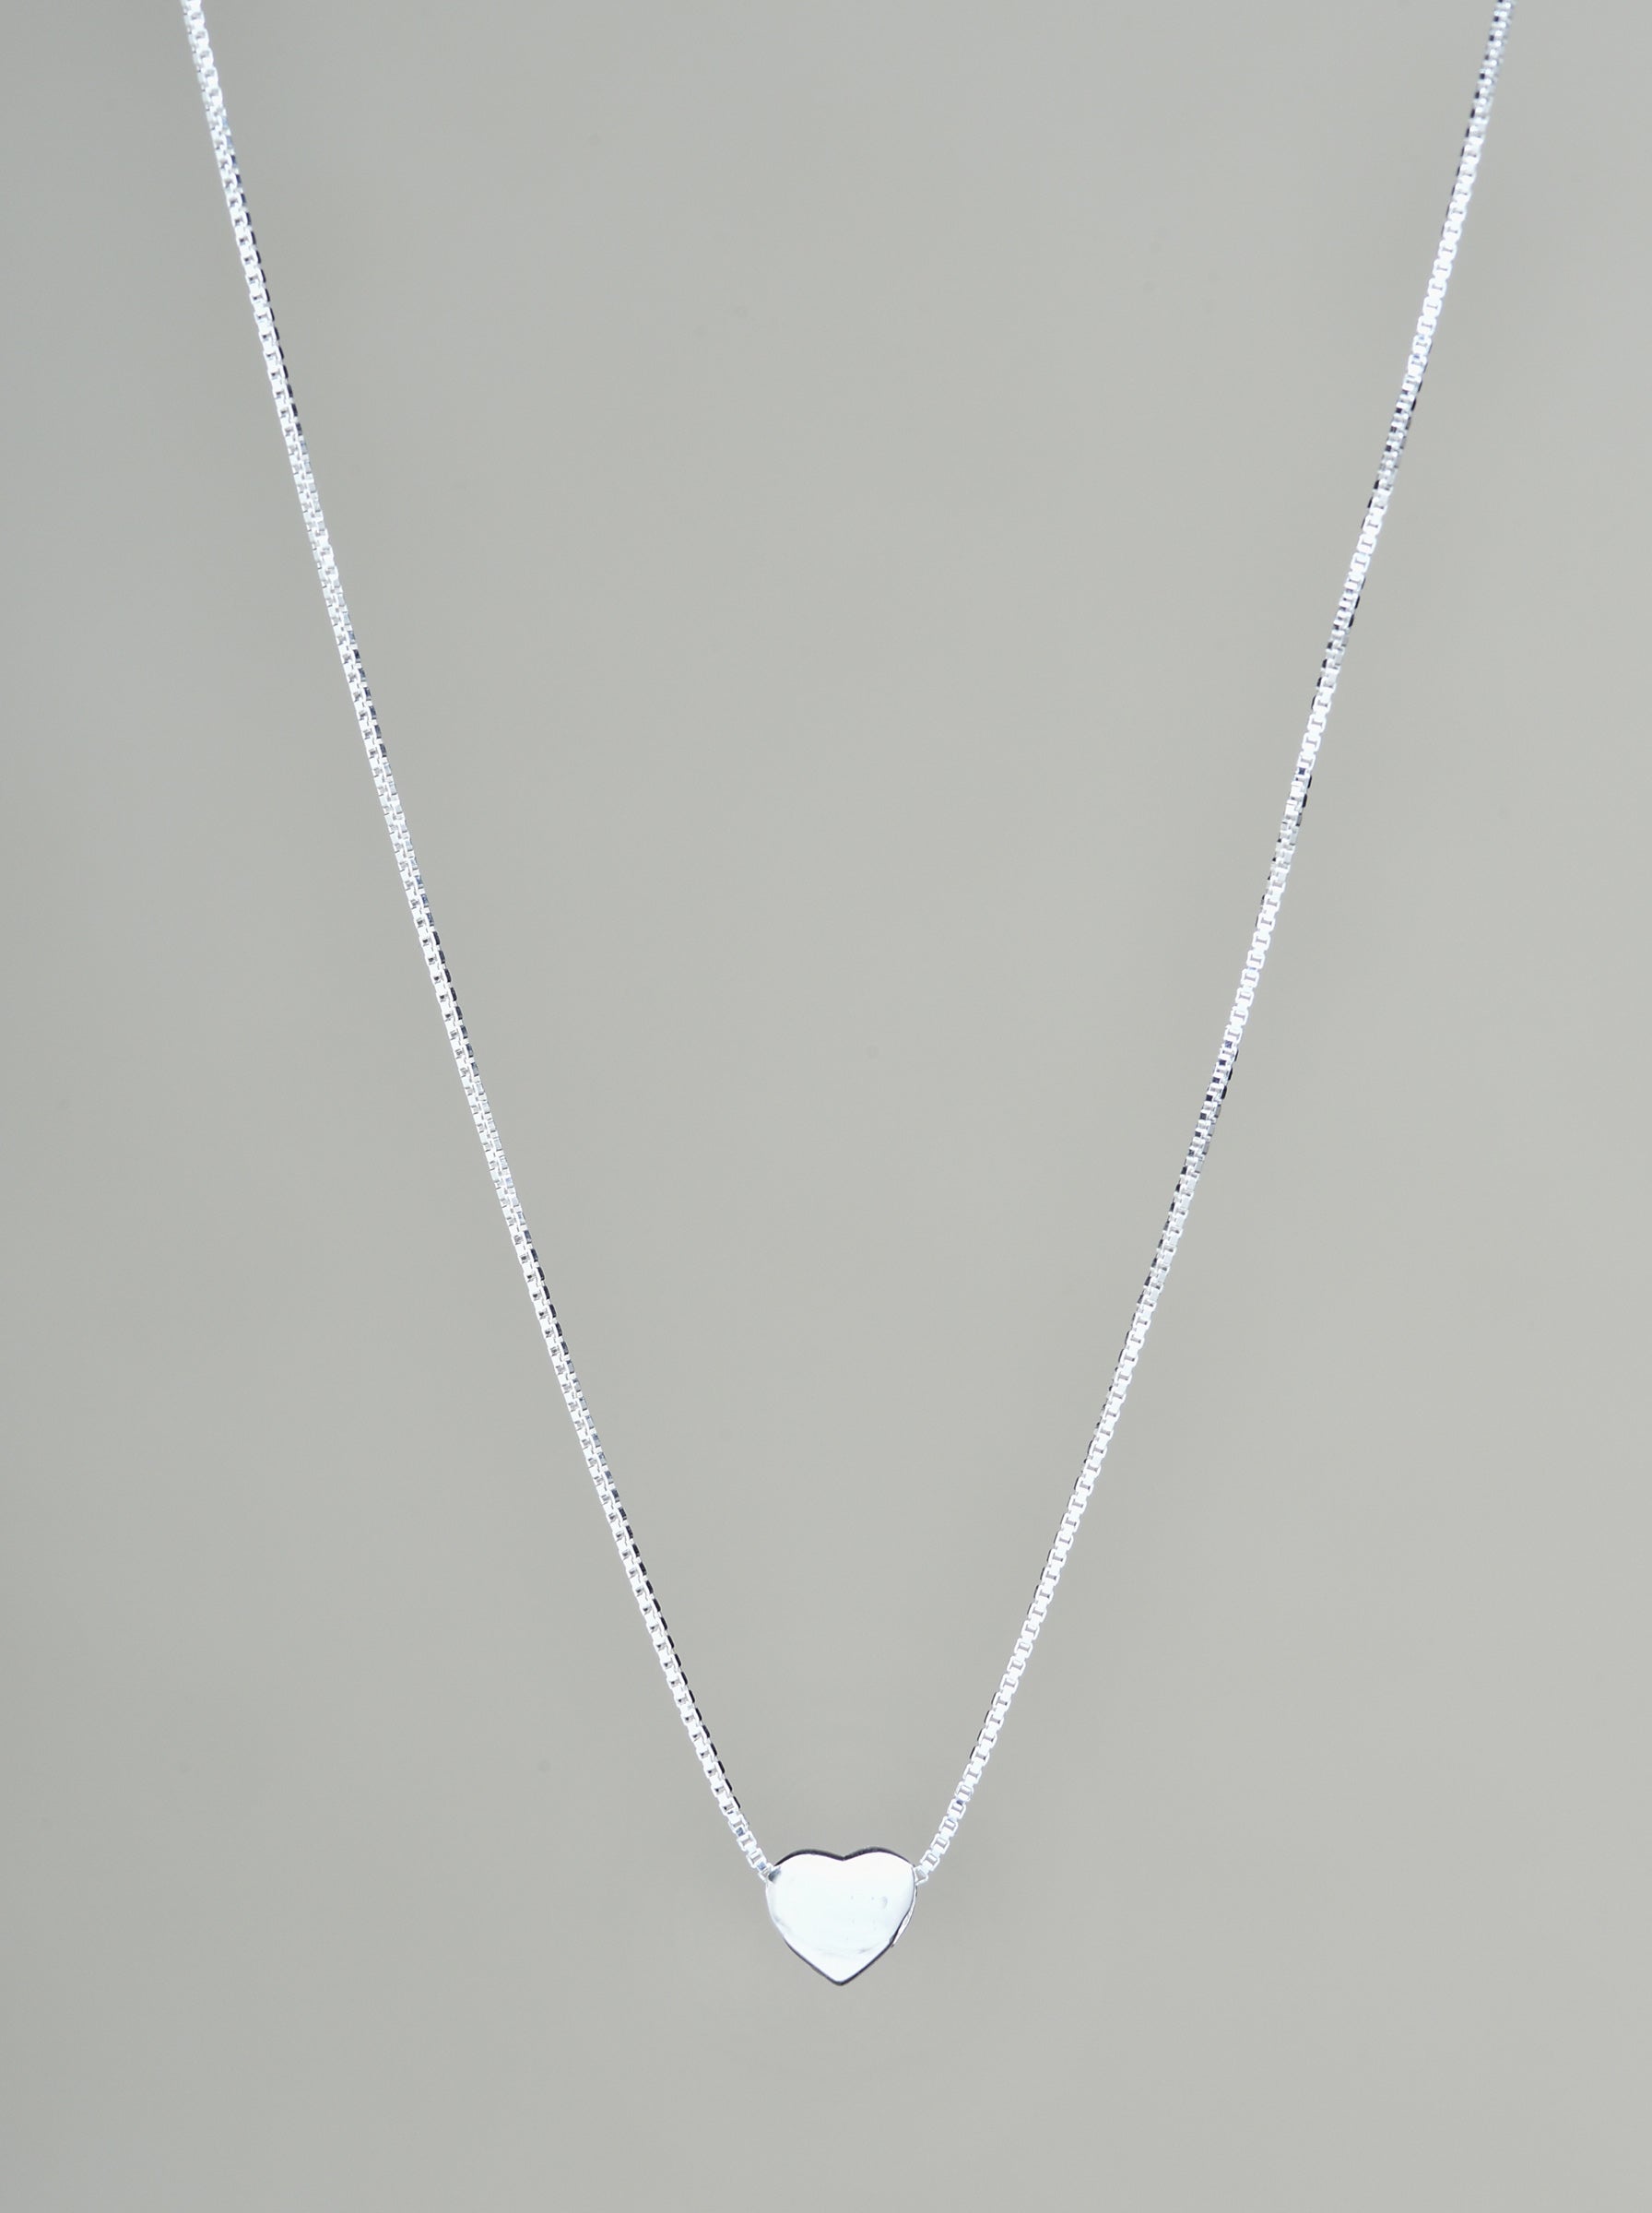 Buy Silver Pendant Chain | Necklace for Women Online in India